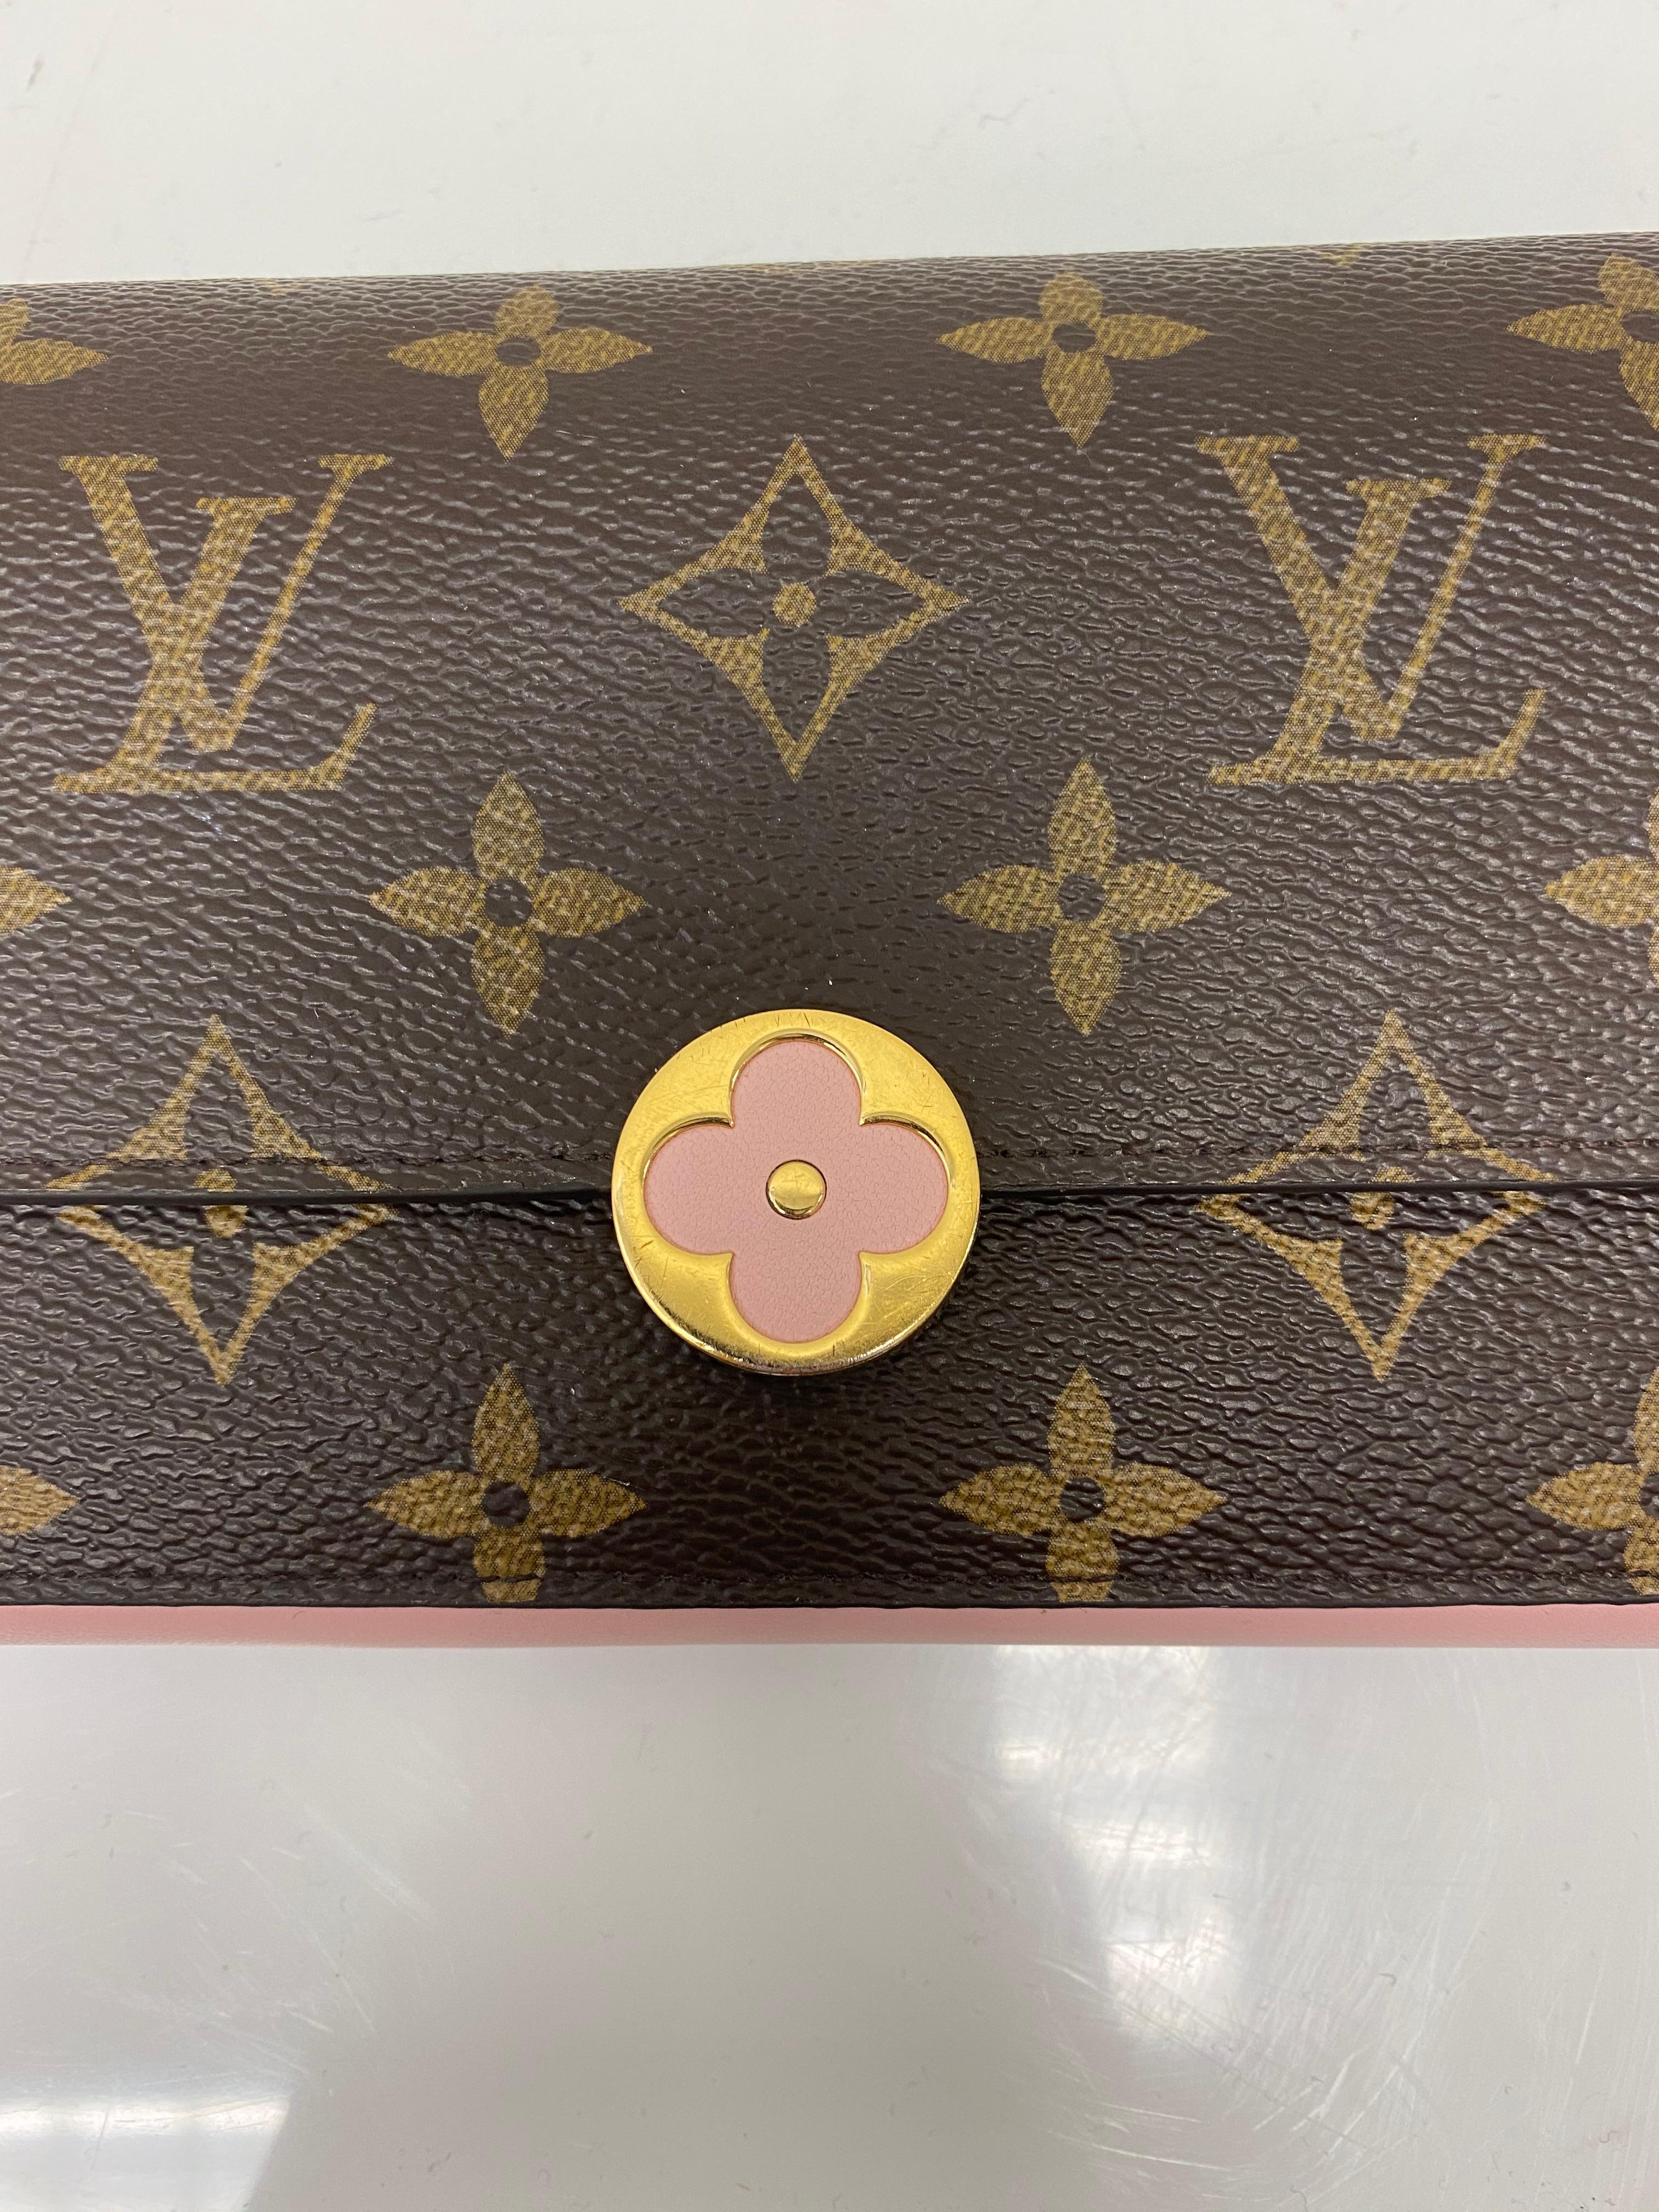 Louis Vuitton Monogram Flore Wallet In Good Condition For Sale In Roslyn, NY